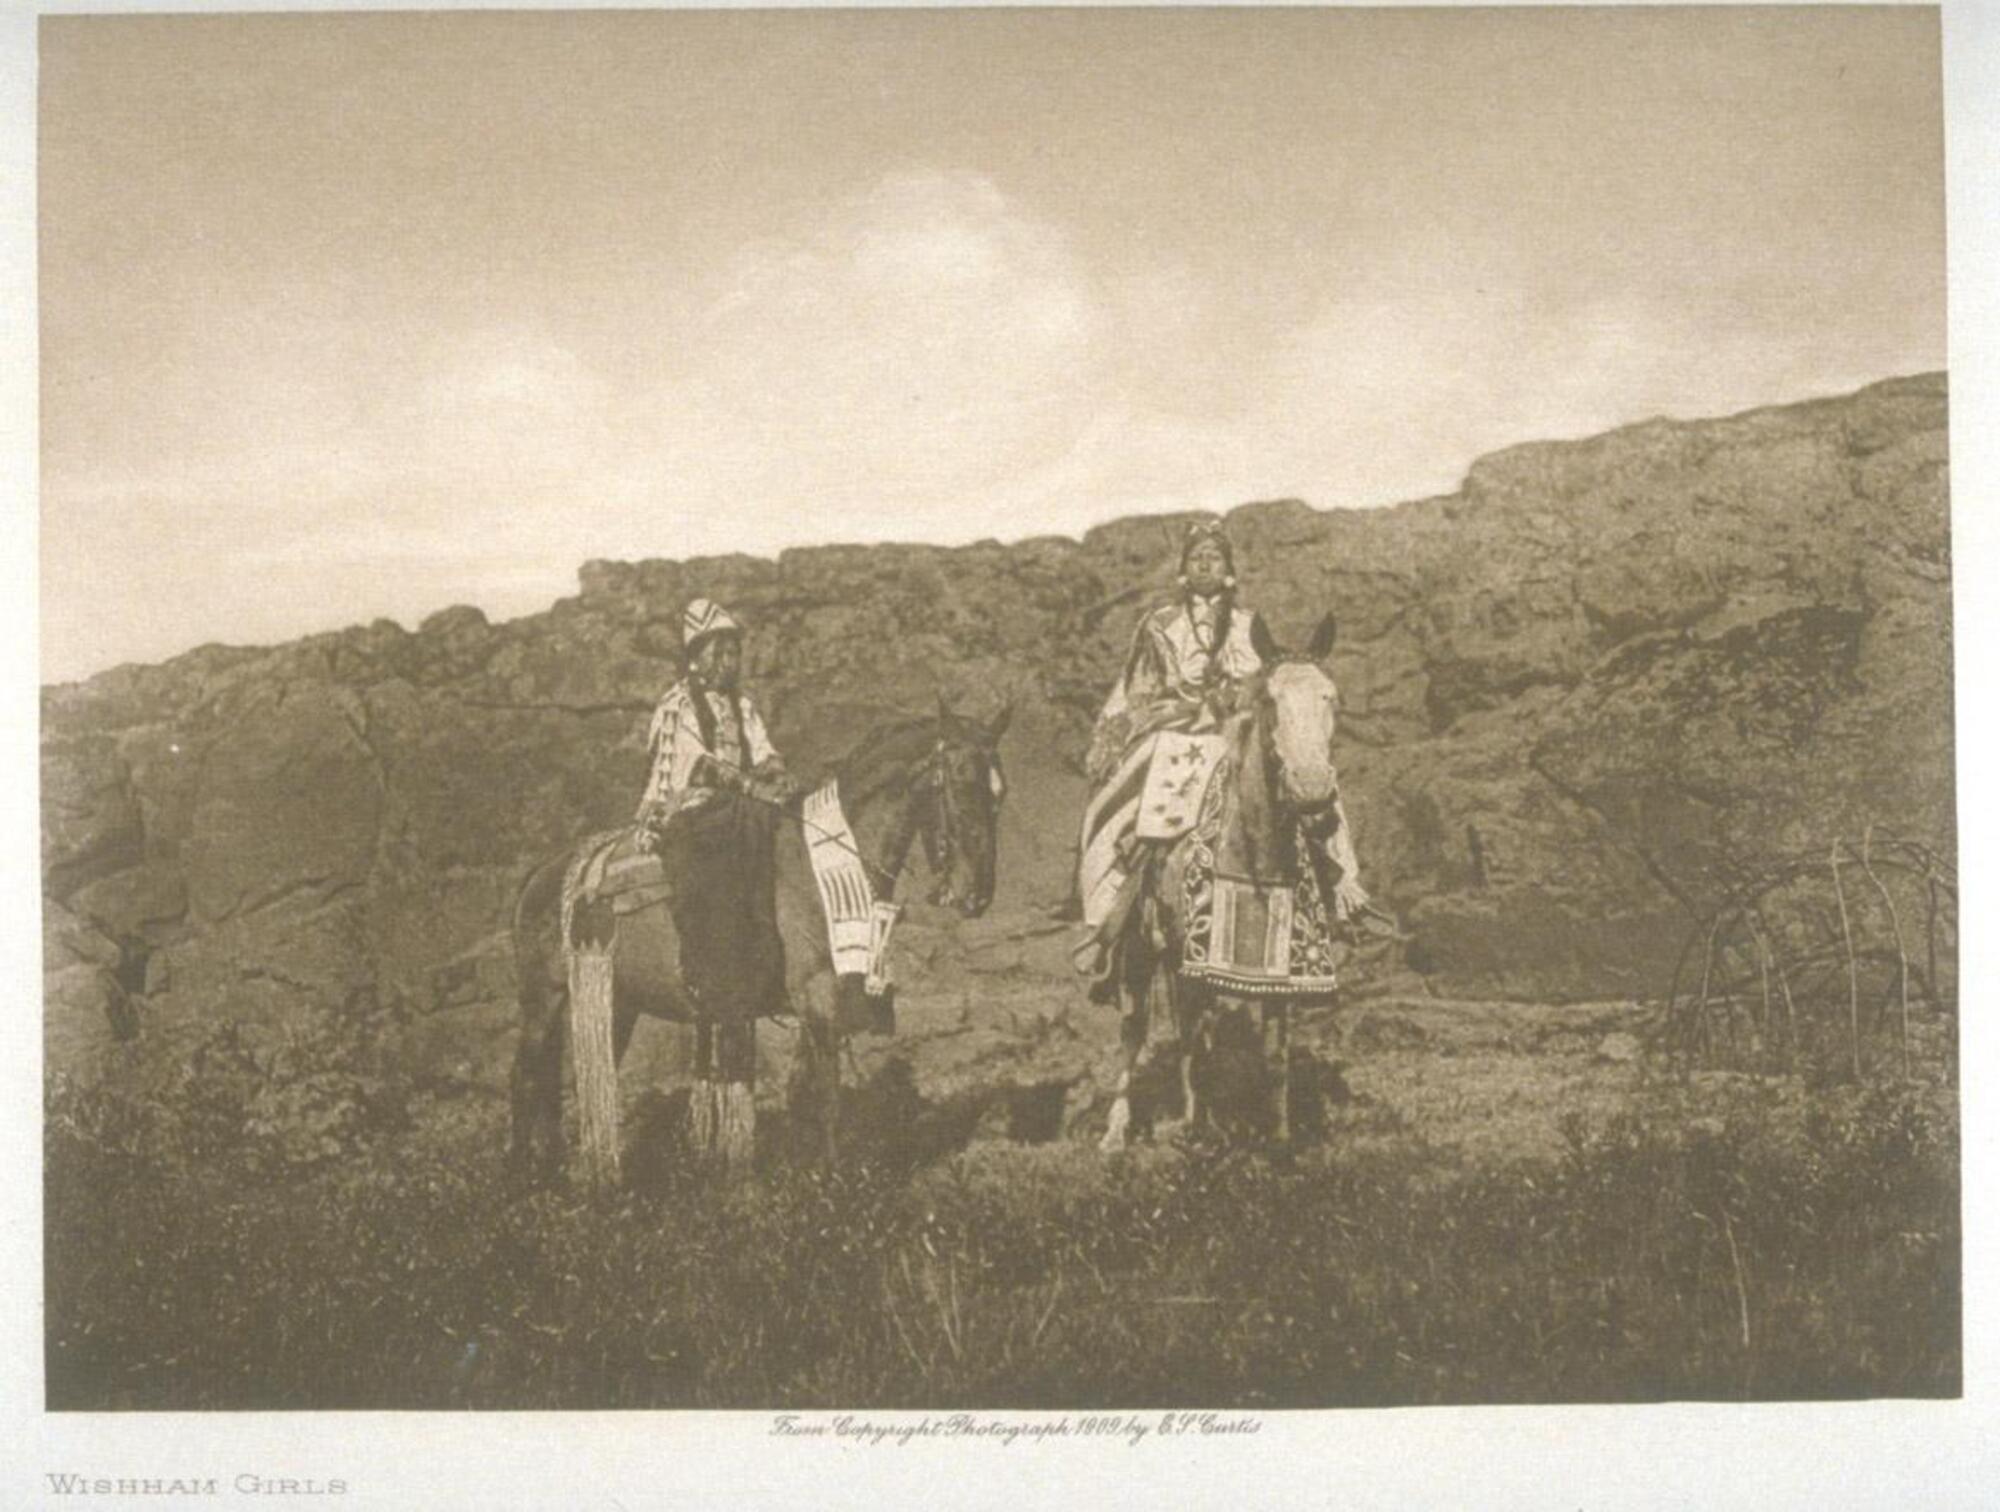 A photograph of two young girls riding horses through a rocky landscape. The girls and horses wear clothing made of fabric, adorned with beadwork and embroidery. 